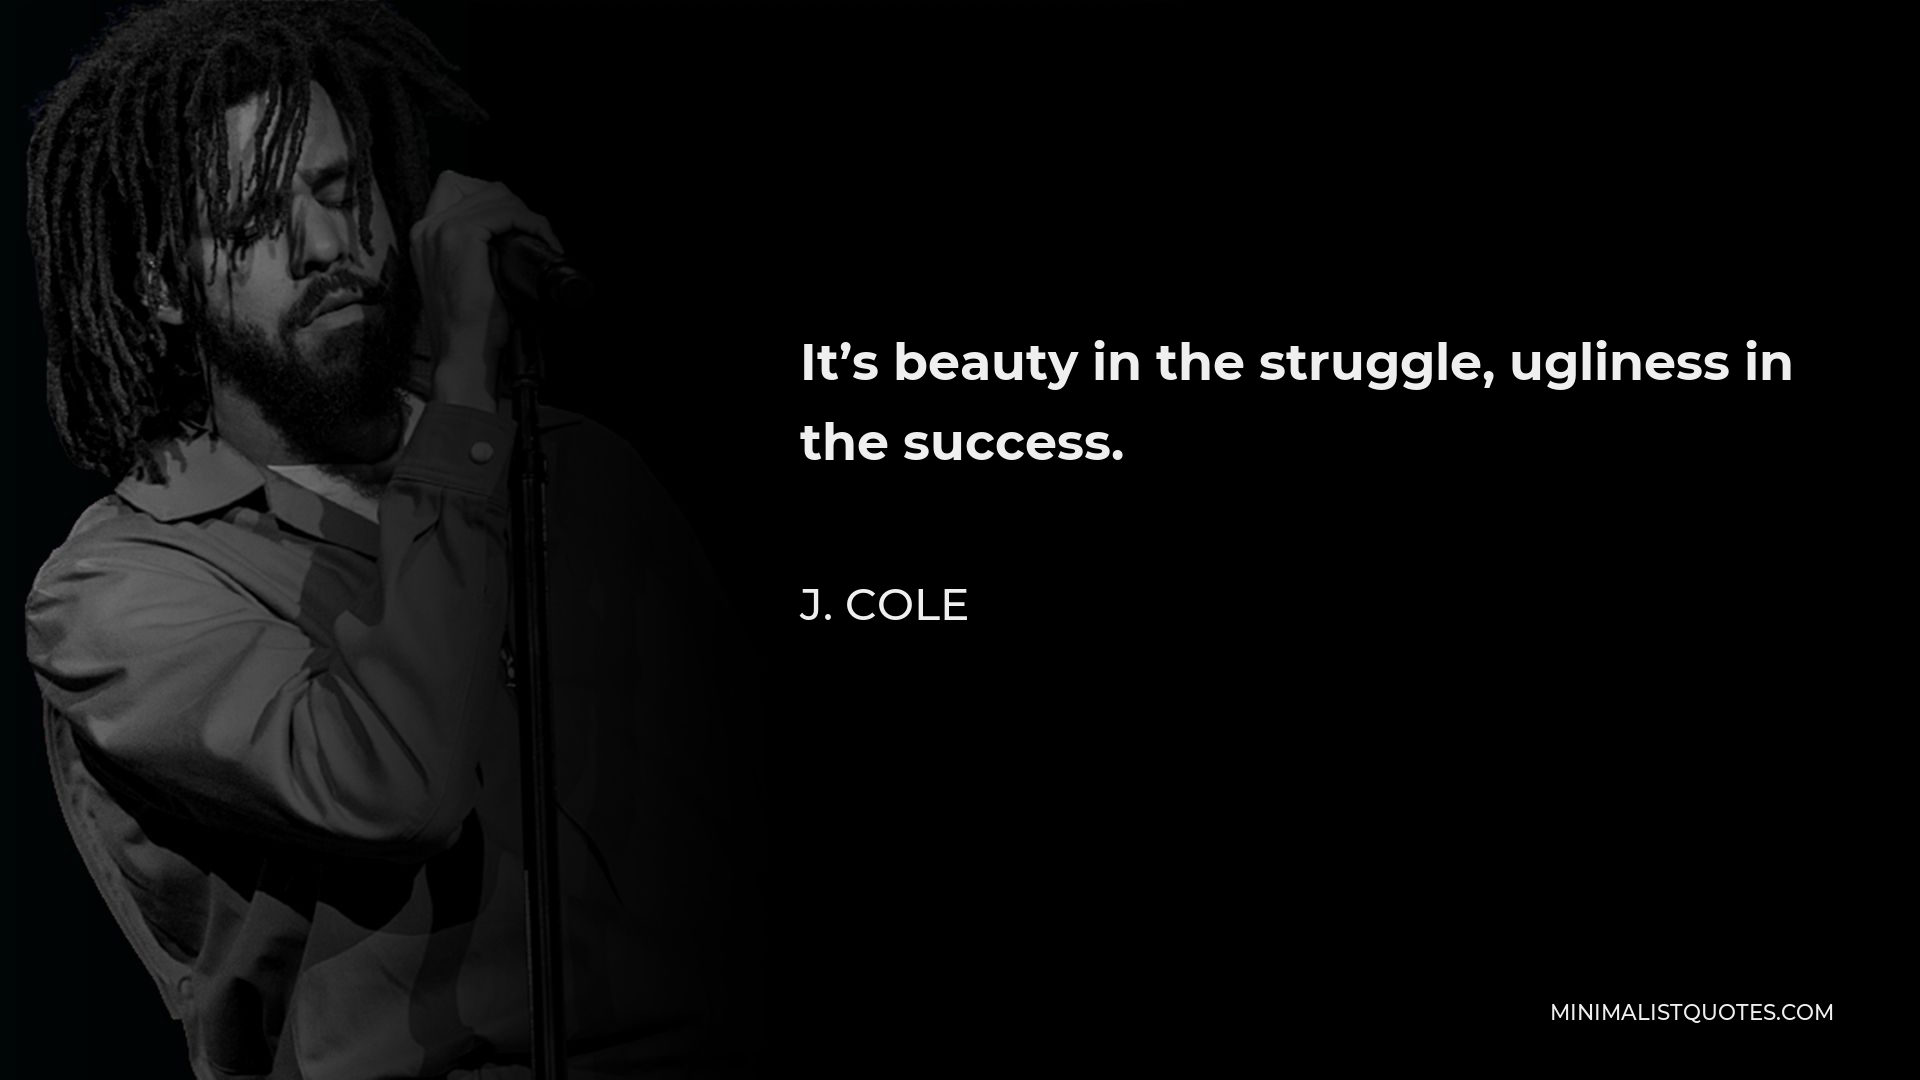 J. Cole Quote - It’s beauty in the struggle, ugliness in the success.